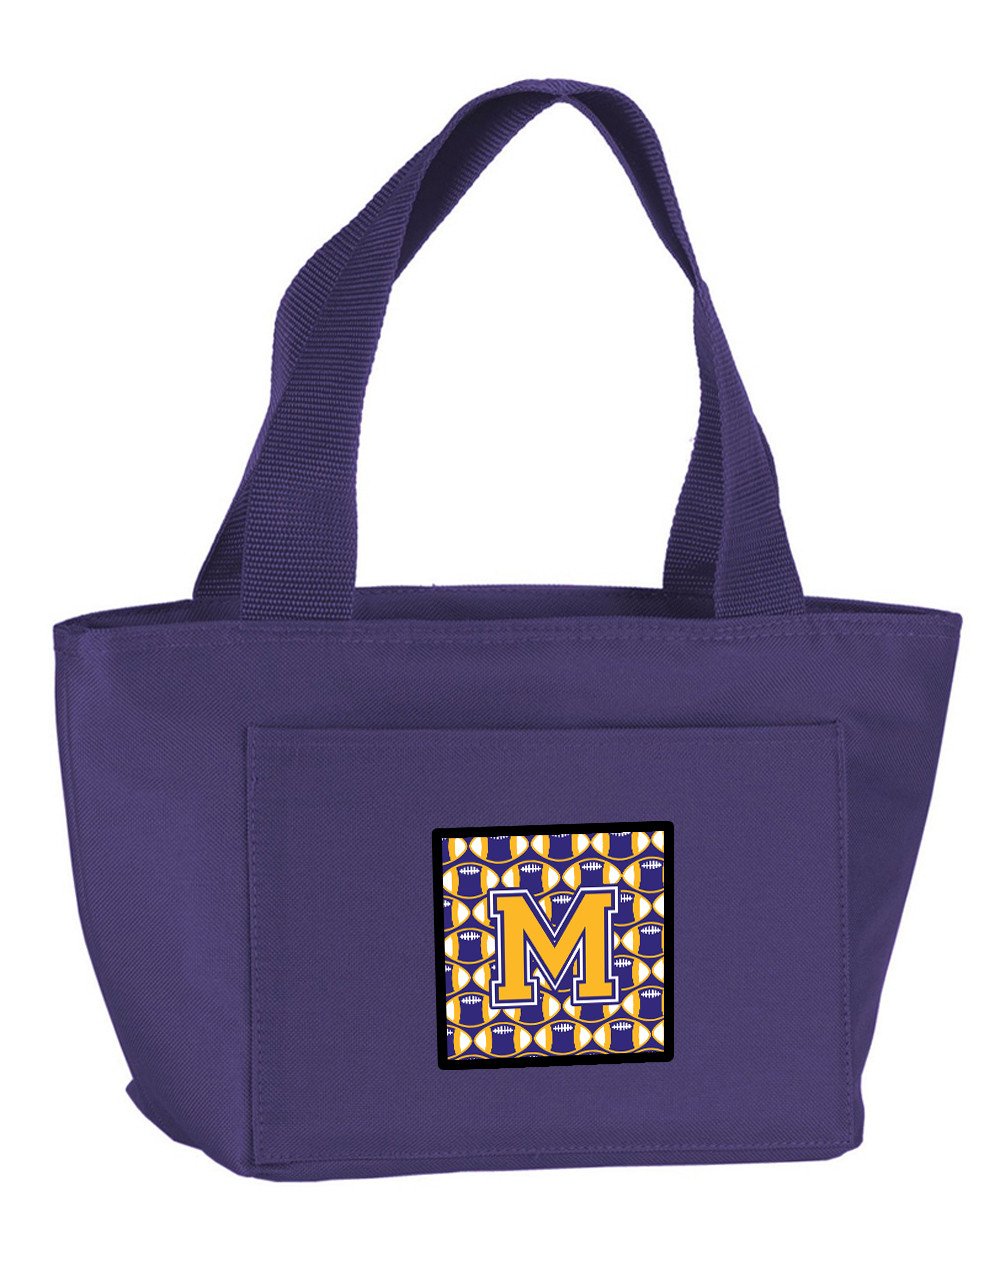 Letter M Football Purple and Gold Lunch Bag CJ1064-MPR-8808 by Caroline's Treasures